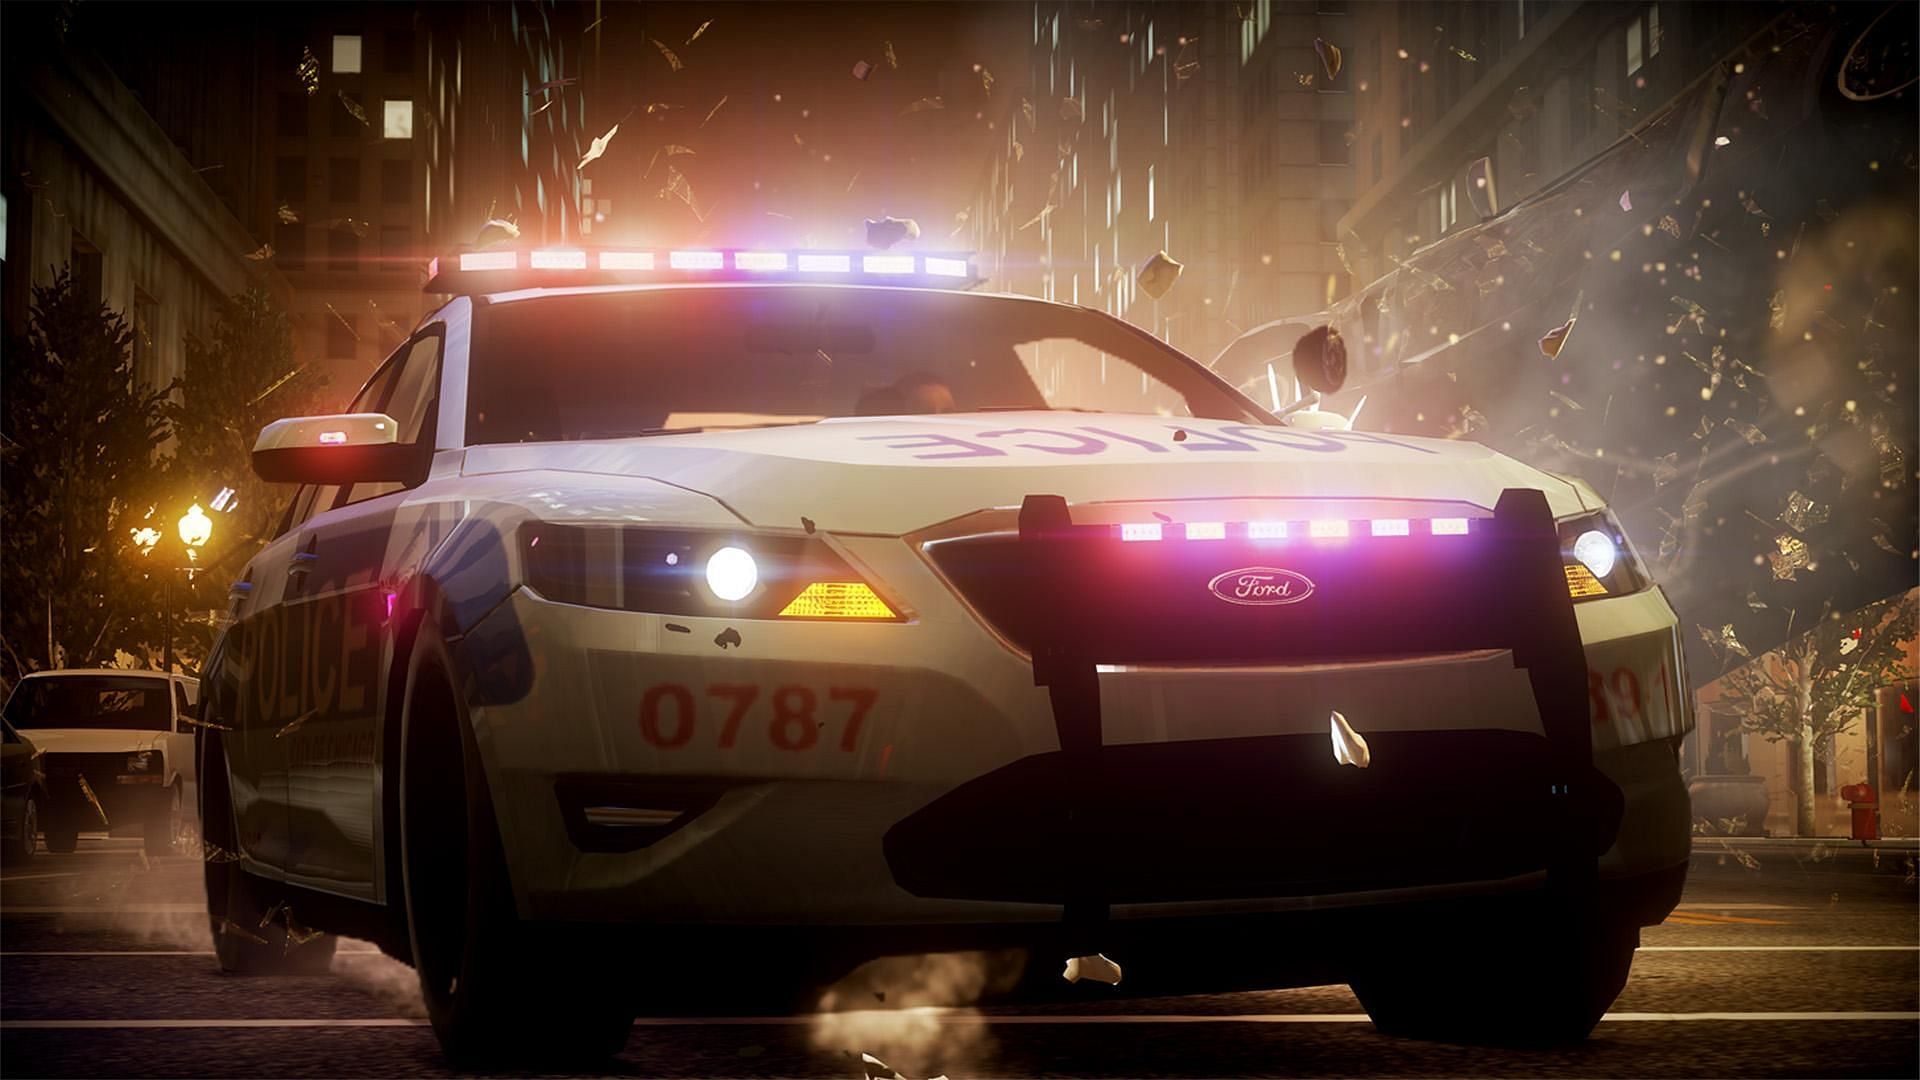 How to get rid of the cops in the game (Image via Wallpaper Cave)